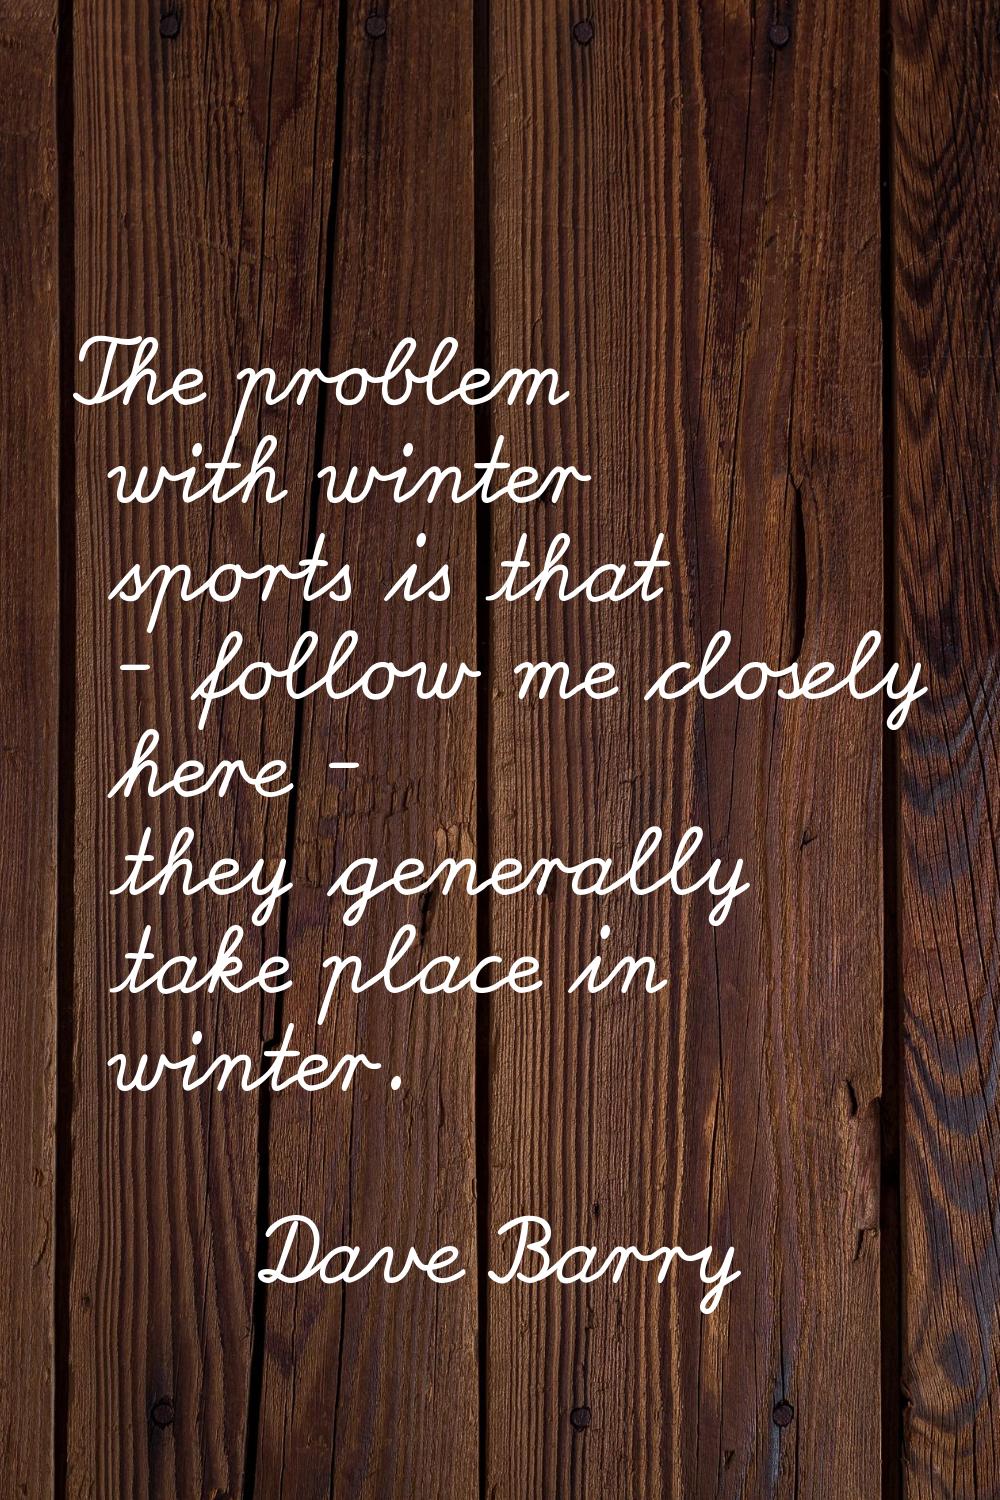 The problem with winter sports is that - follow me closely here - they generally take place in wint